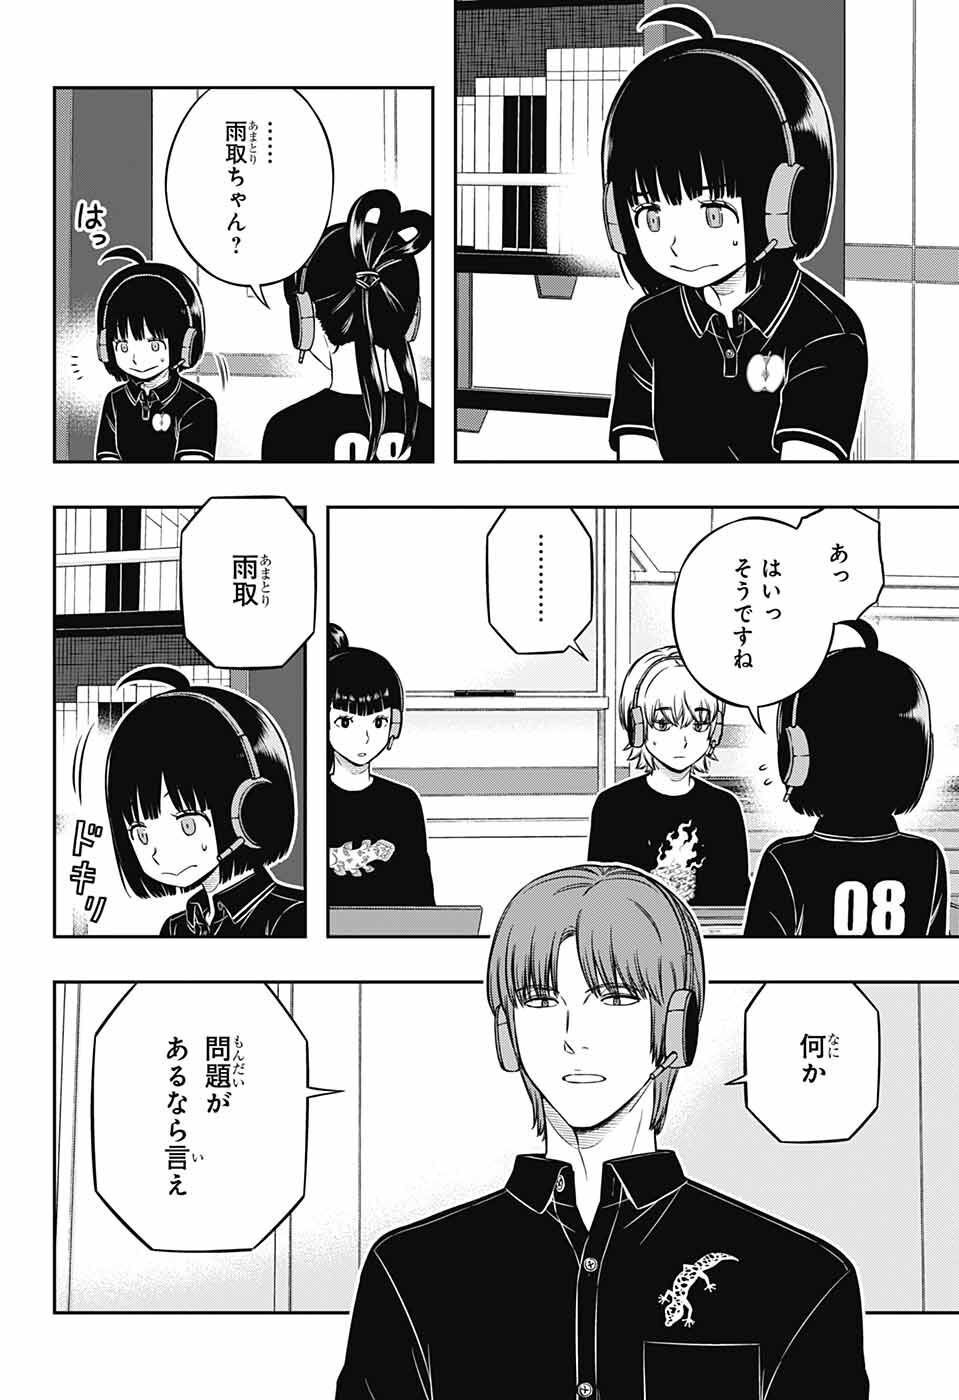 World Trigger - Chapter 232 - Page 2